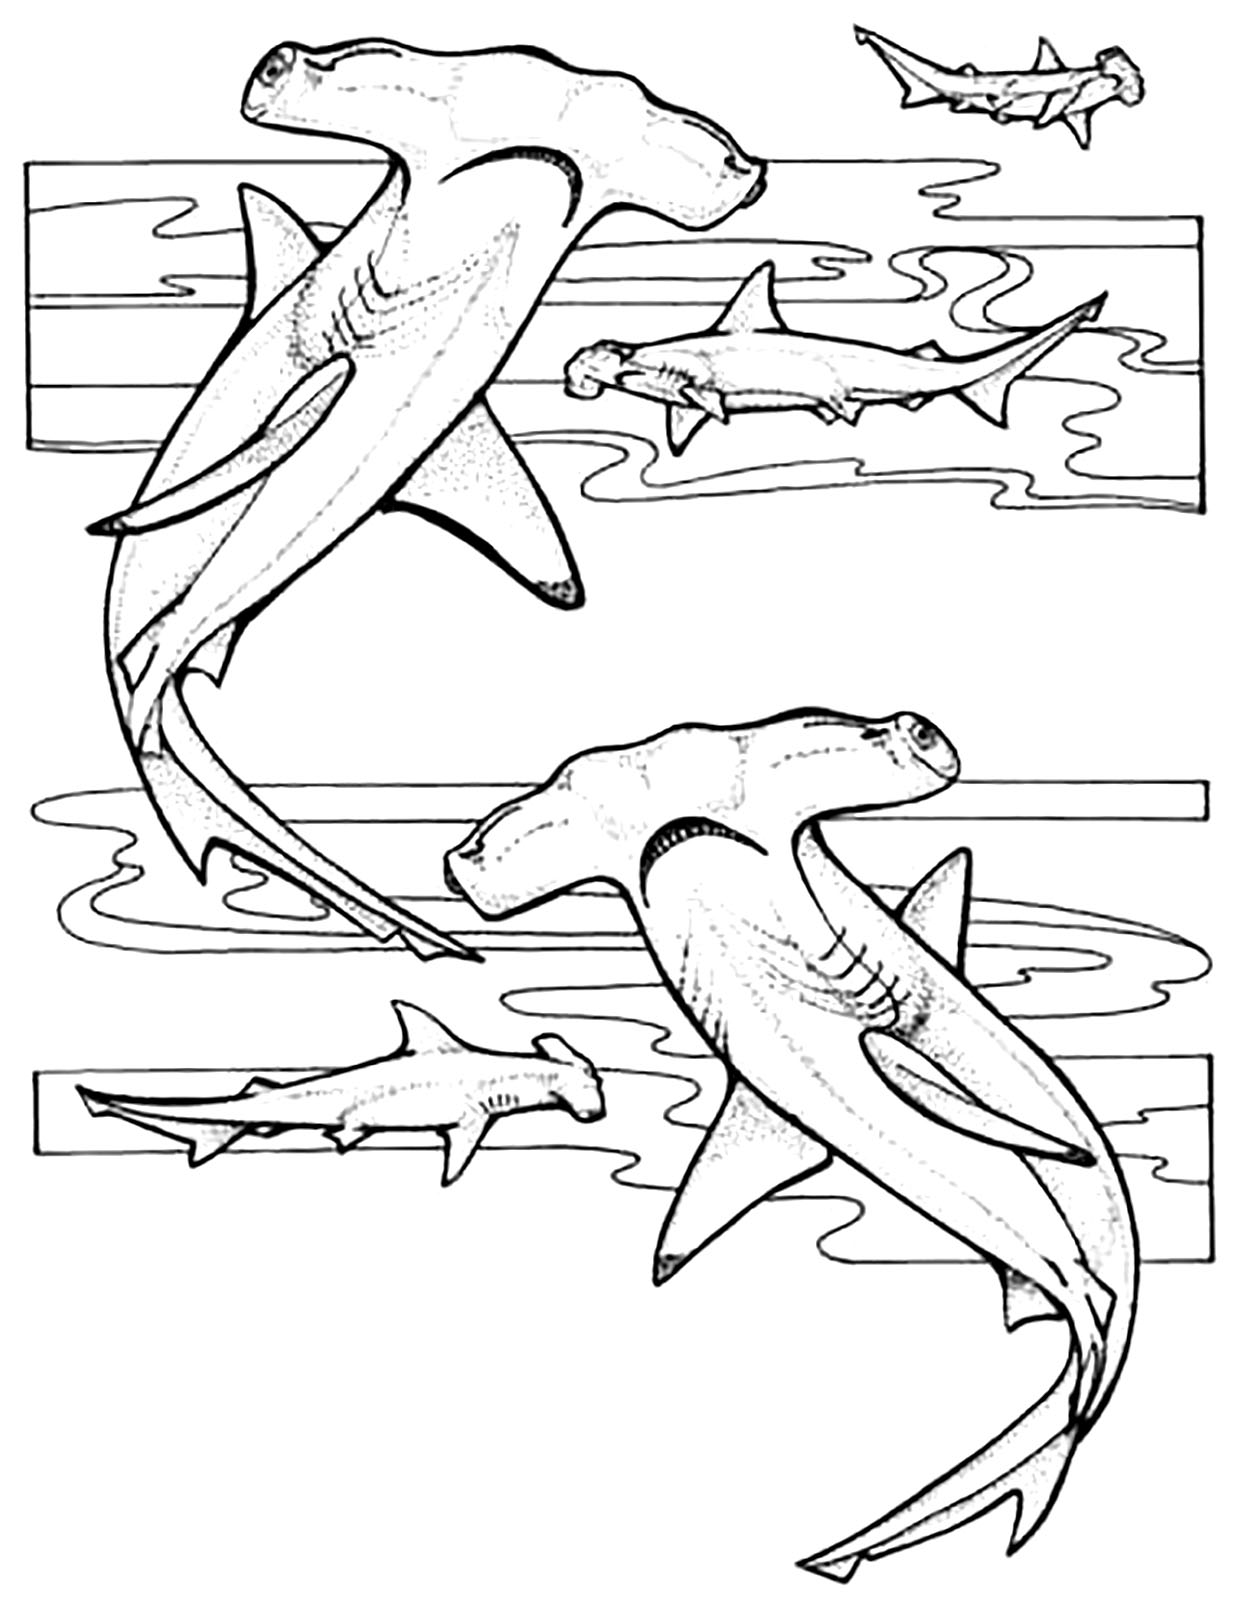 Hammerhead sharks - Sharks Kids Coloring Pages